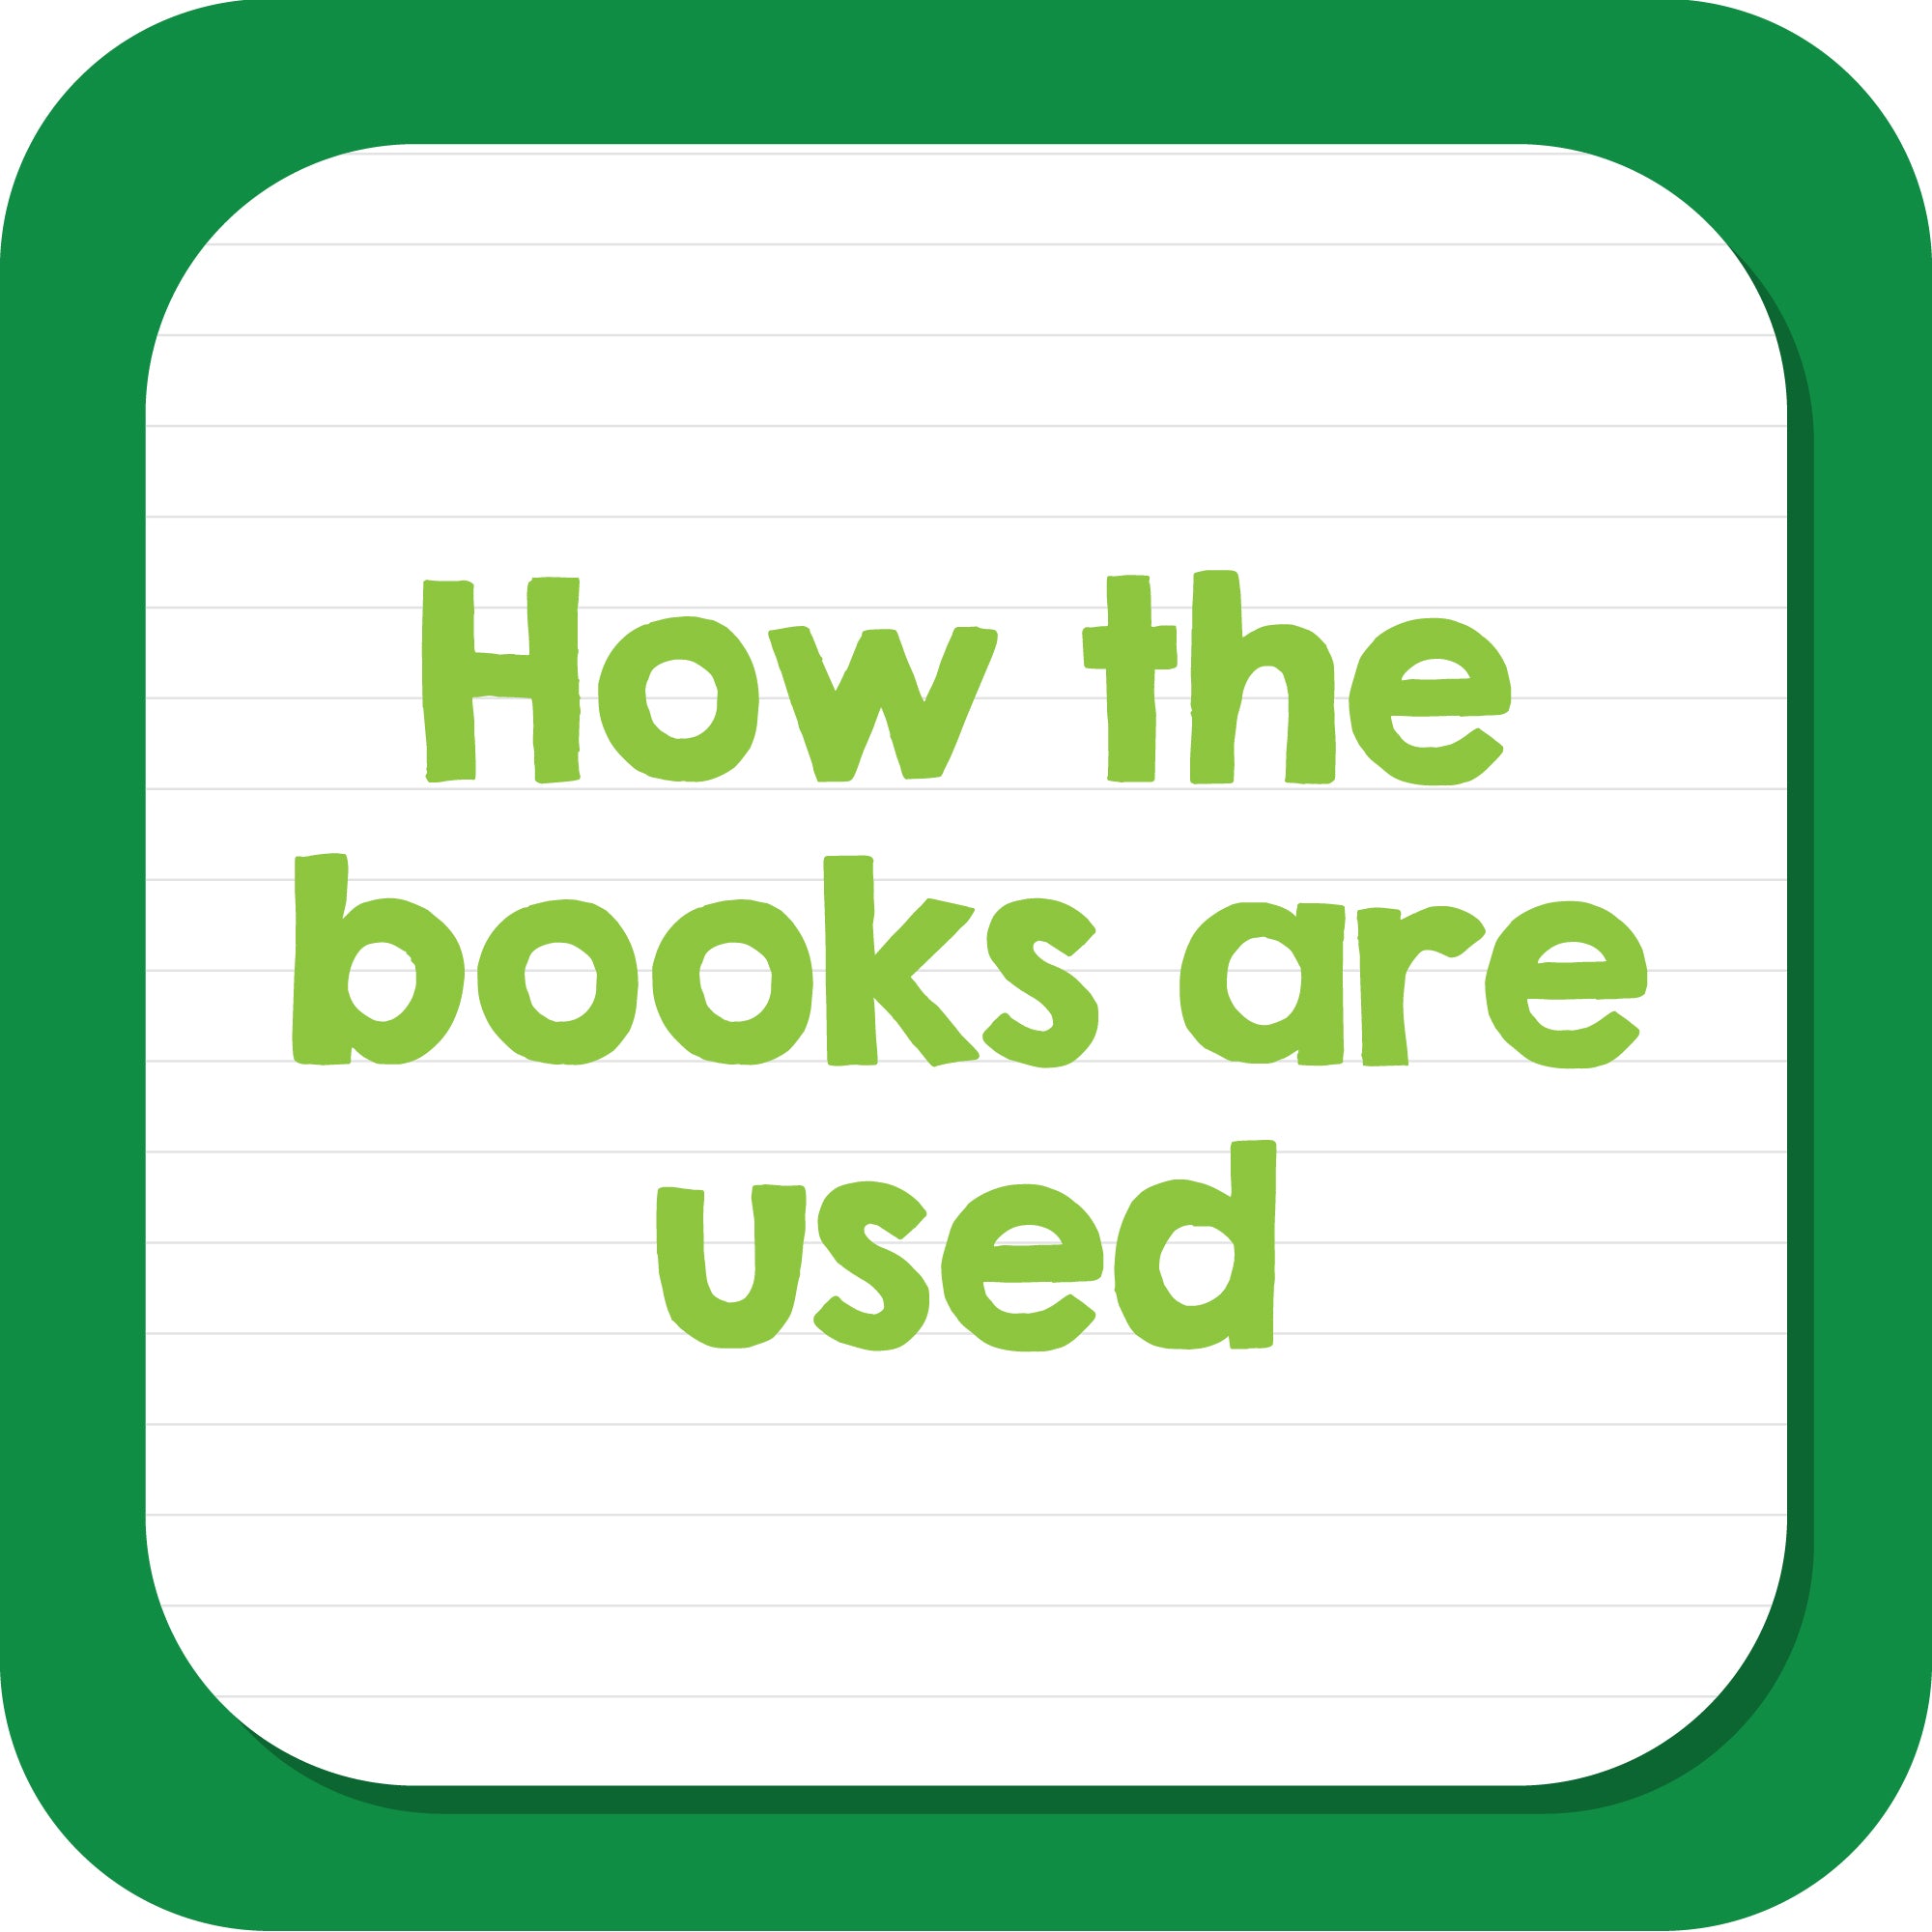 How the books are used